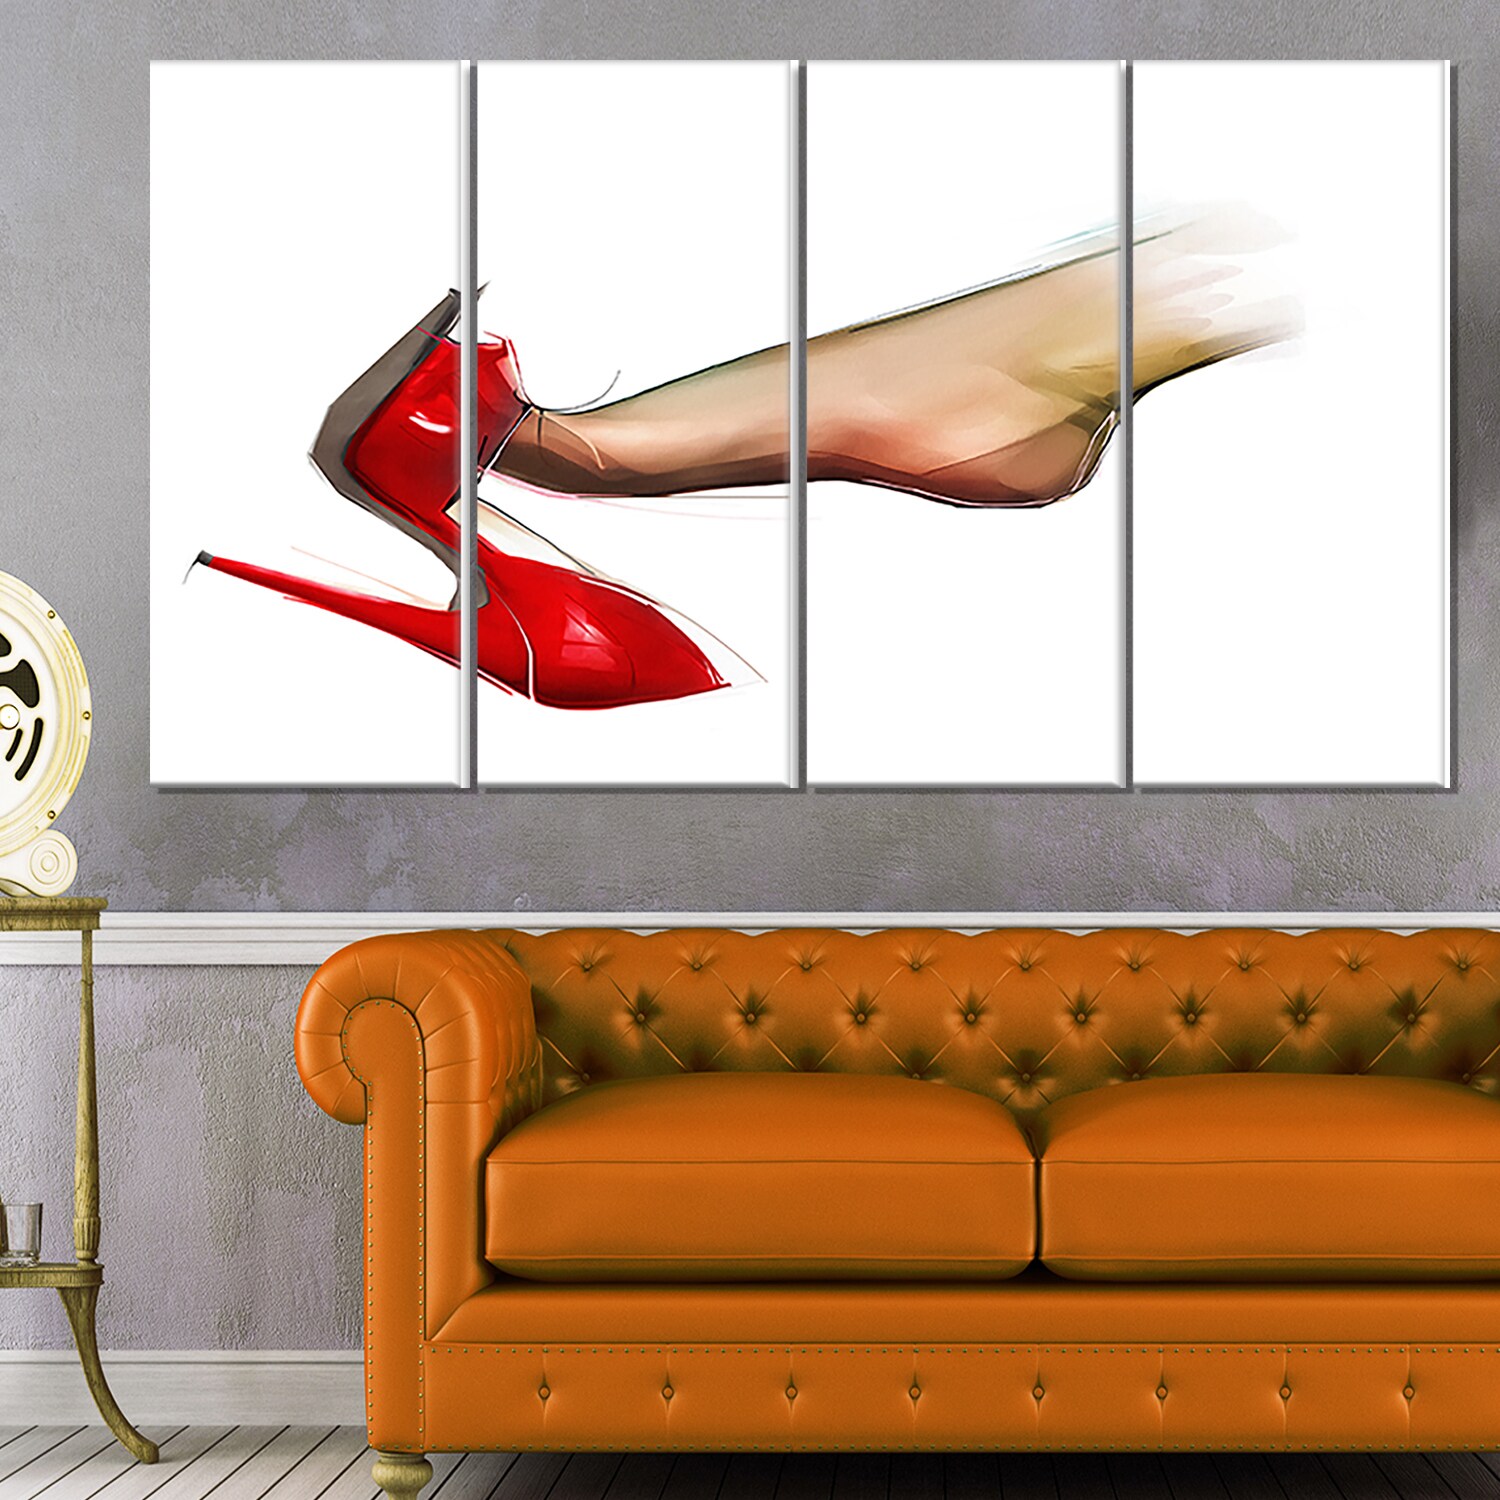 Pors Girl High Heels Drive Poster Print 24x36 Inches Wall Art Classic  Vintage